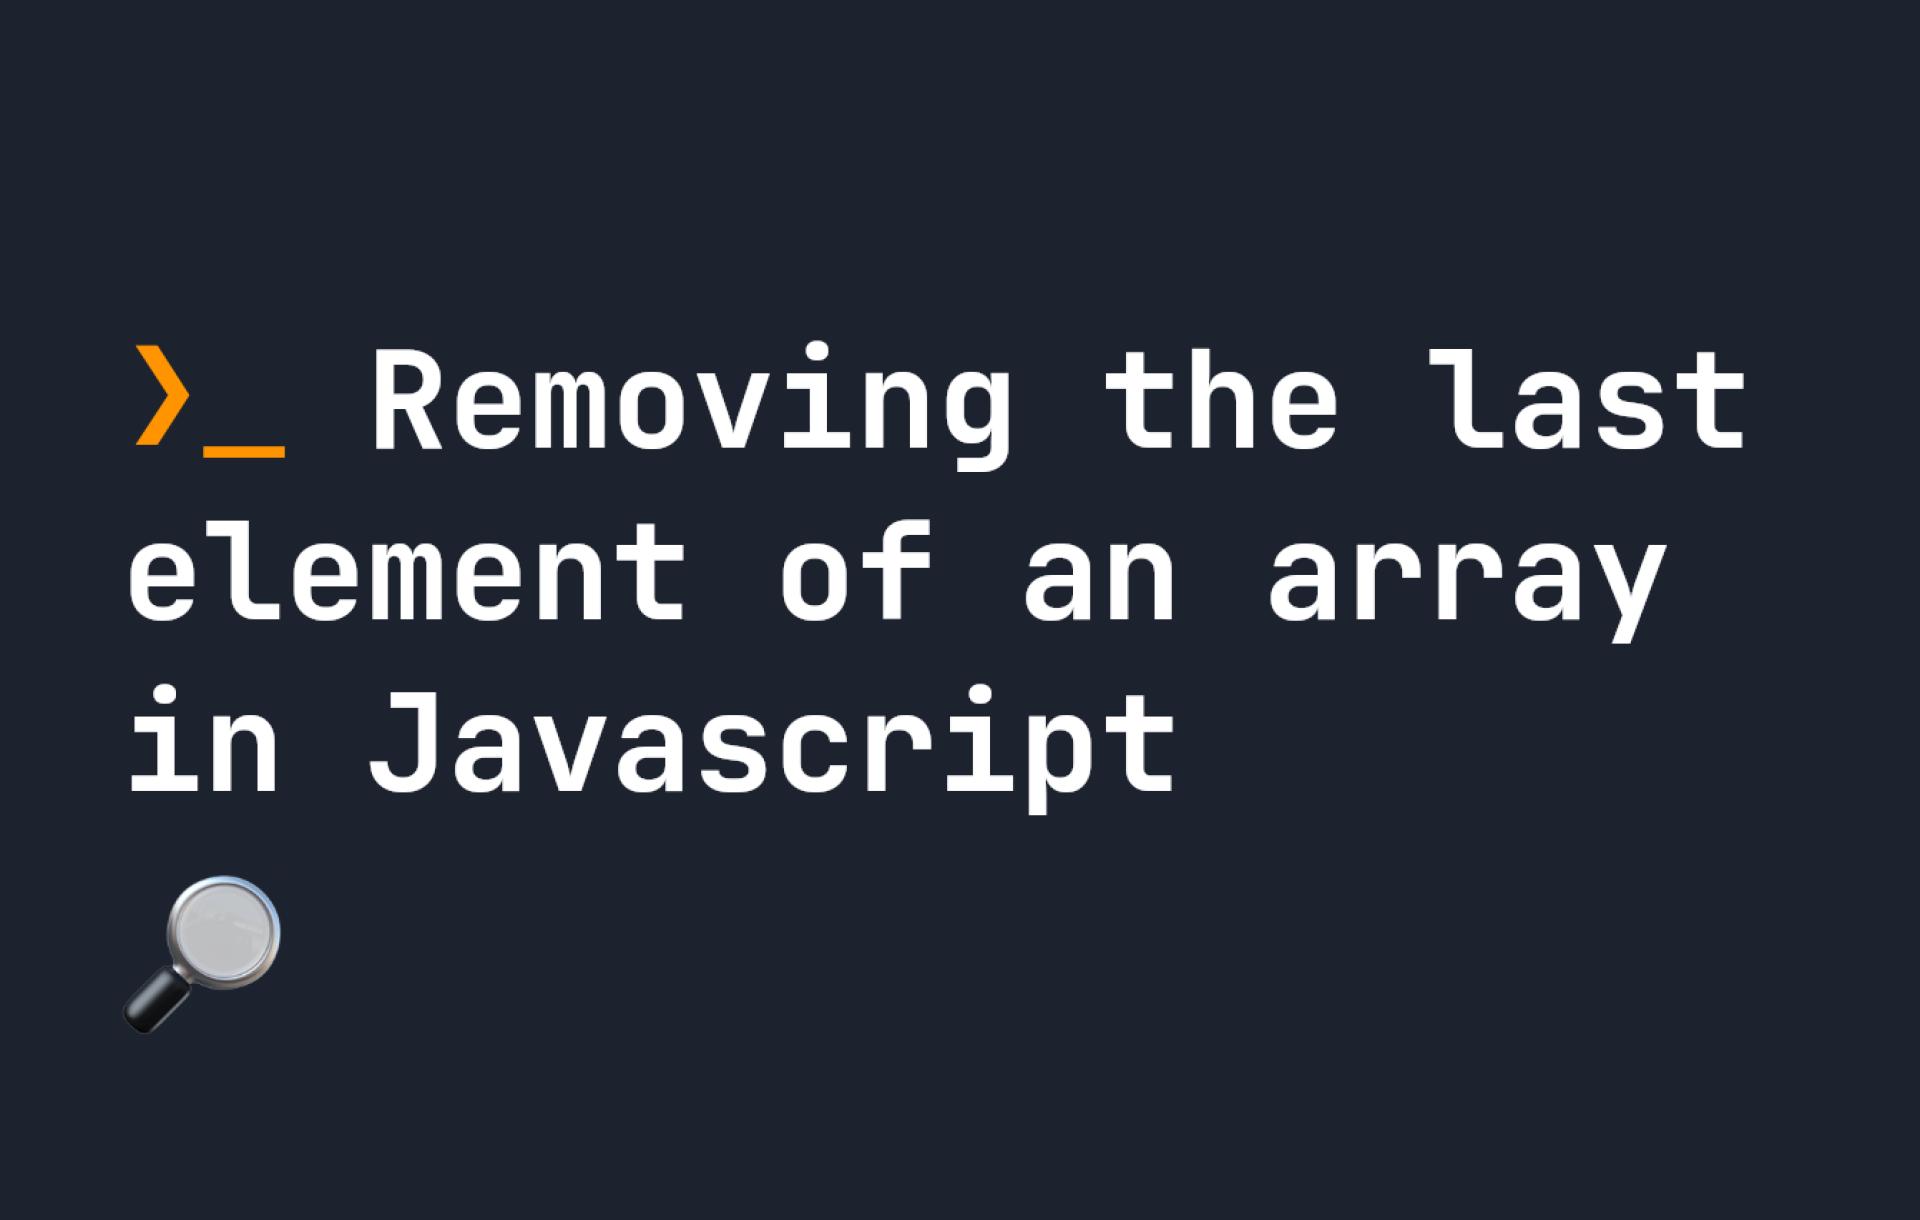 Removing the last element of an array in Javascript